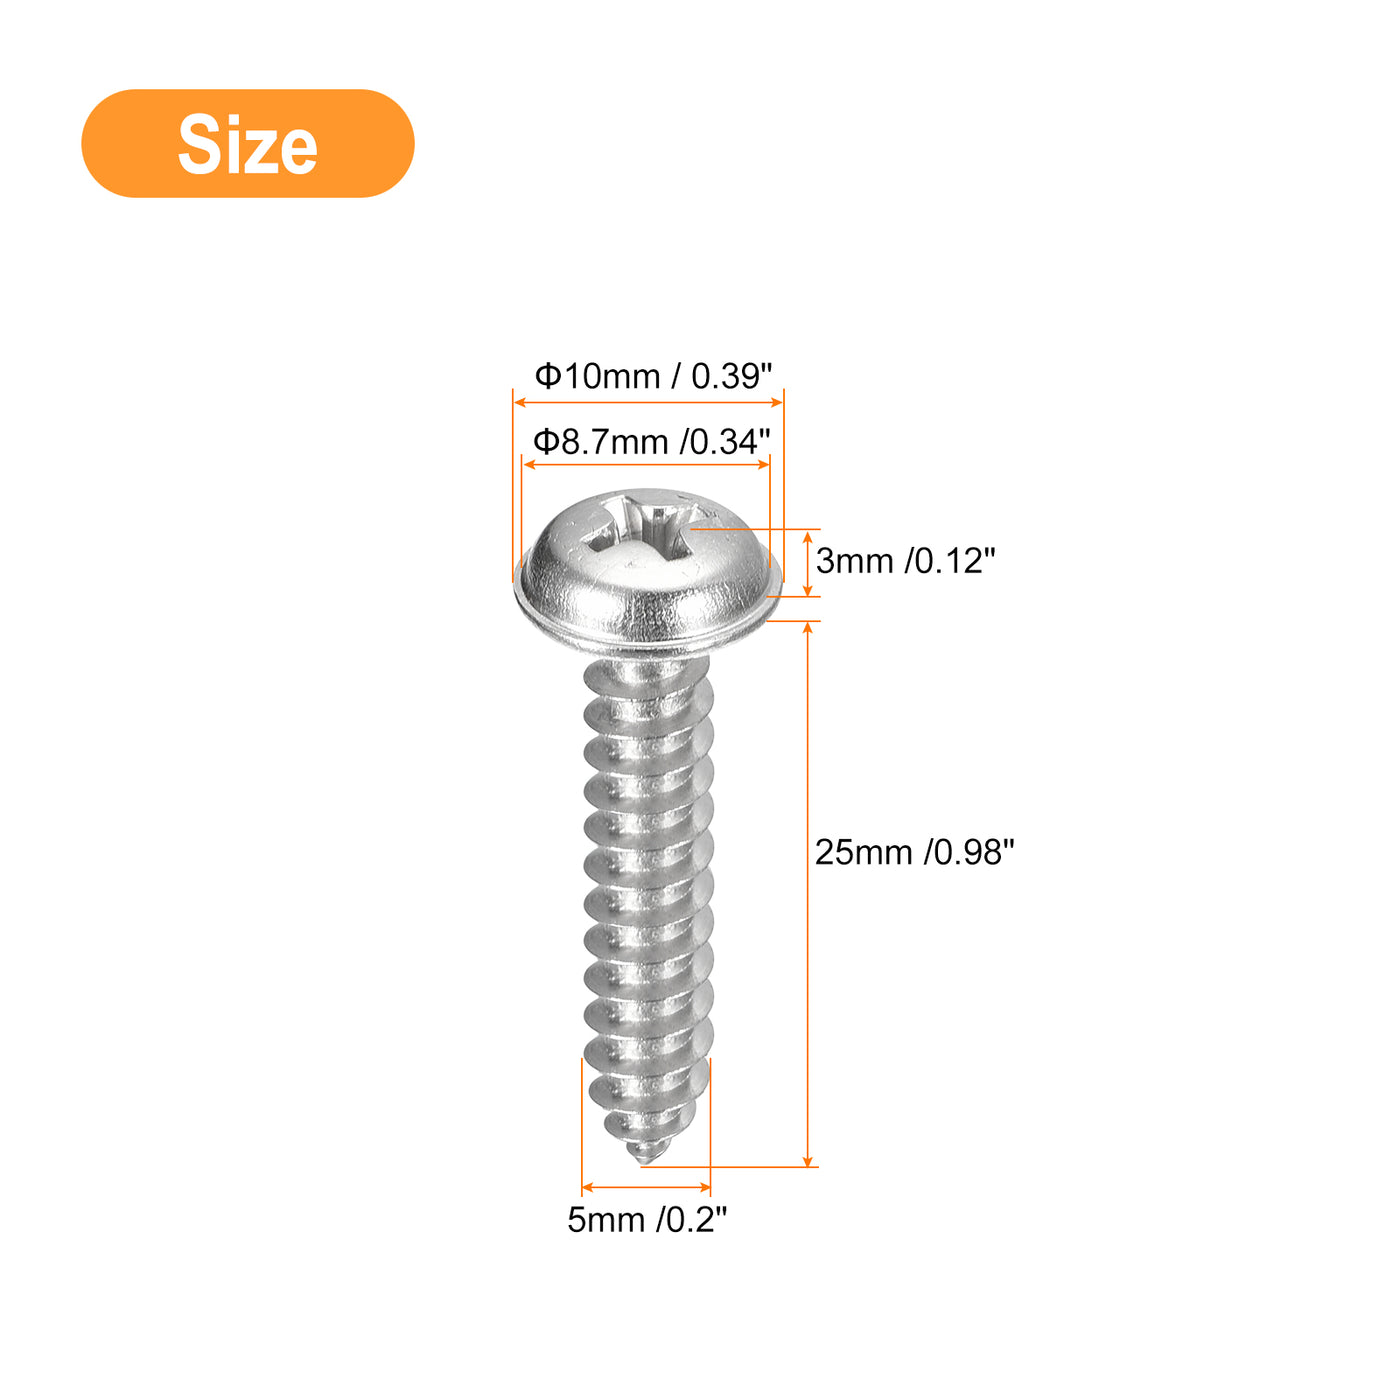 uxcell Uxcell ST5x25mm Phillips Pan Head Self-tapping Screw with Washer, 50pcs - 304 Stainless Steel Wood Screw Full Thread (Silver)